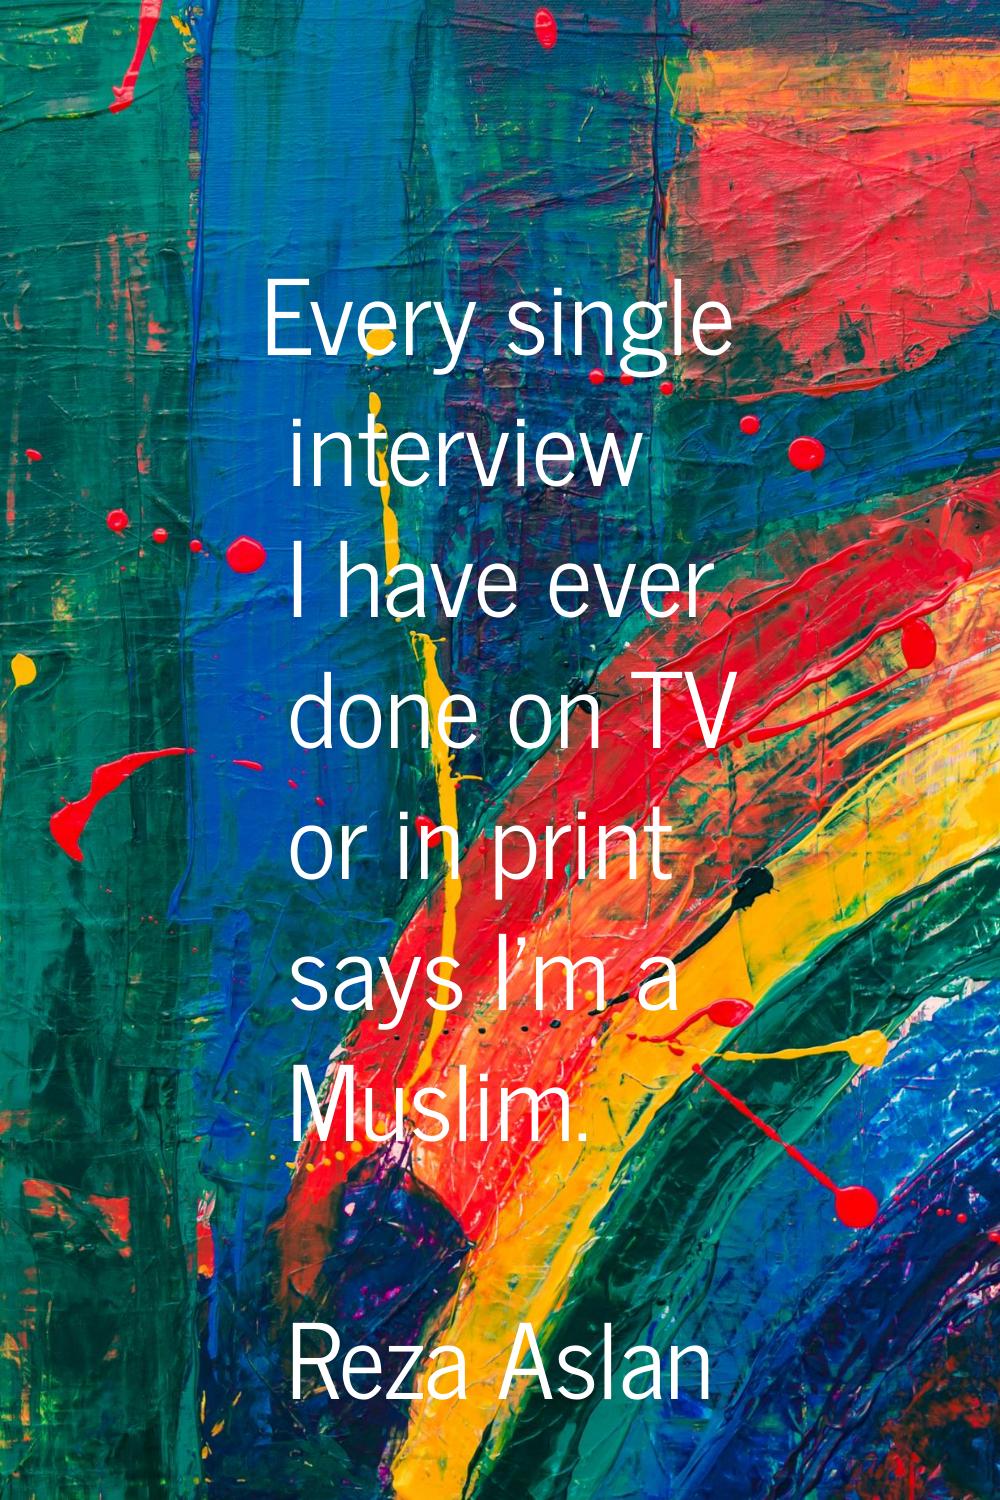 Every single interview I have ever done on TV or in print says I'm a Muslim.